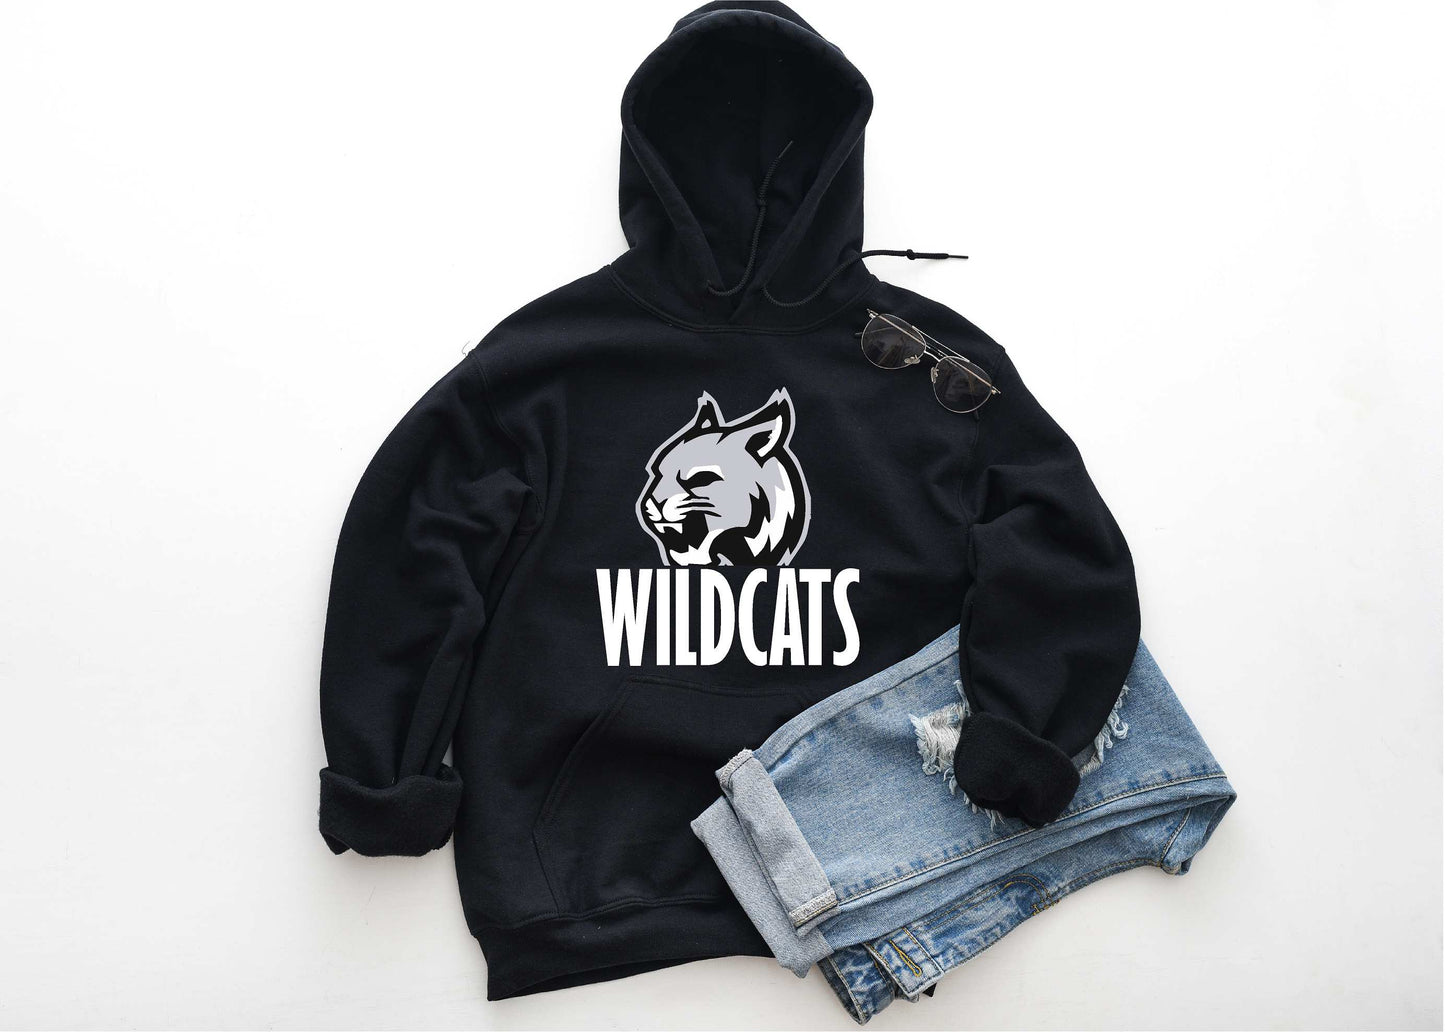 JT Wildcats hoodie, unisex, adult/youth 18500